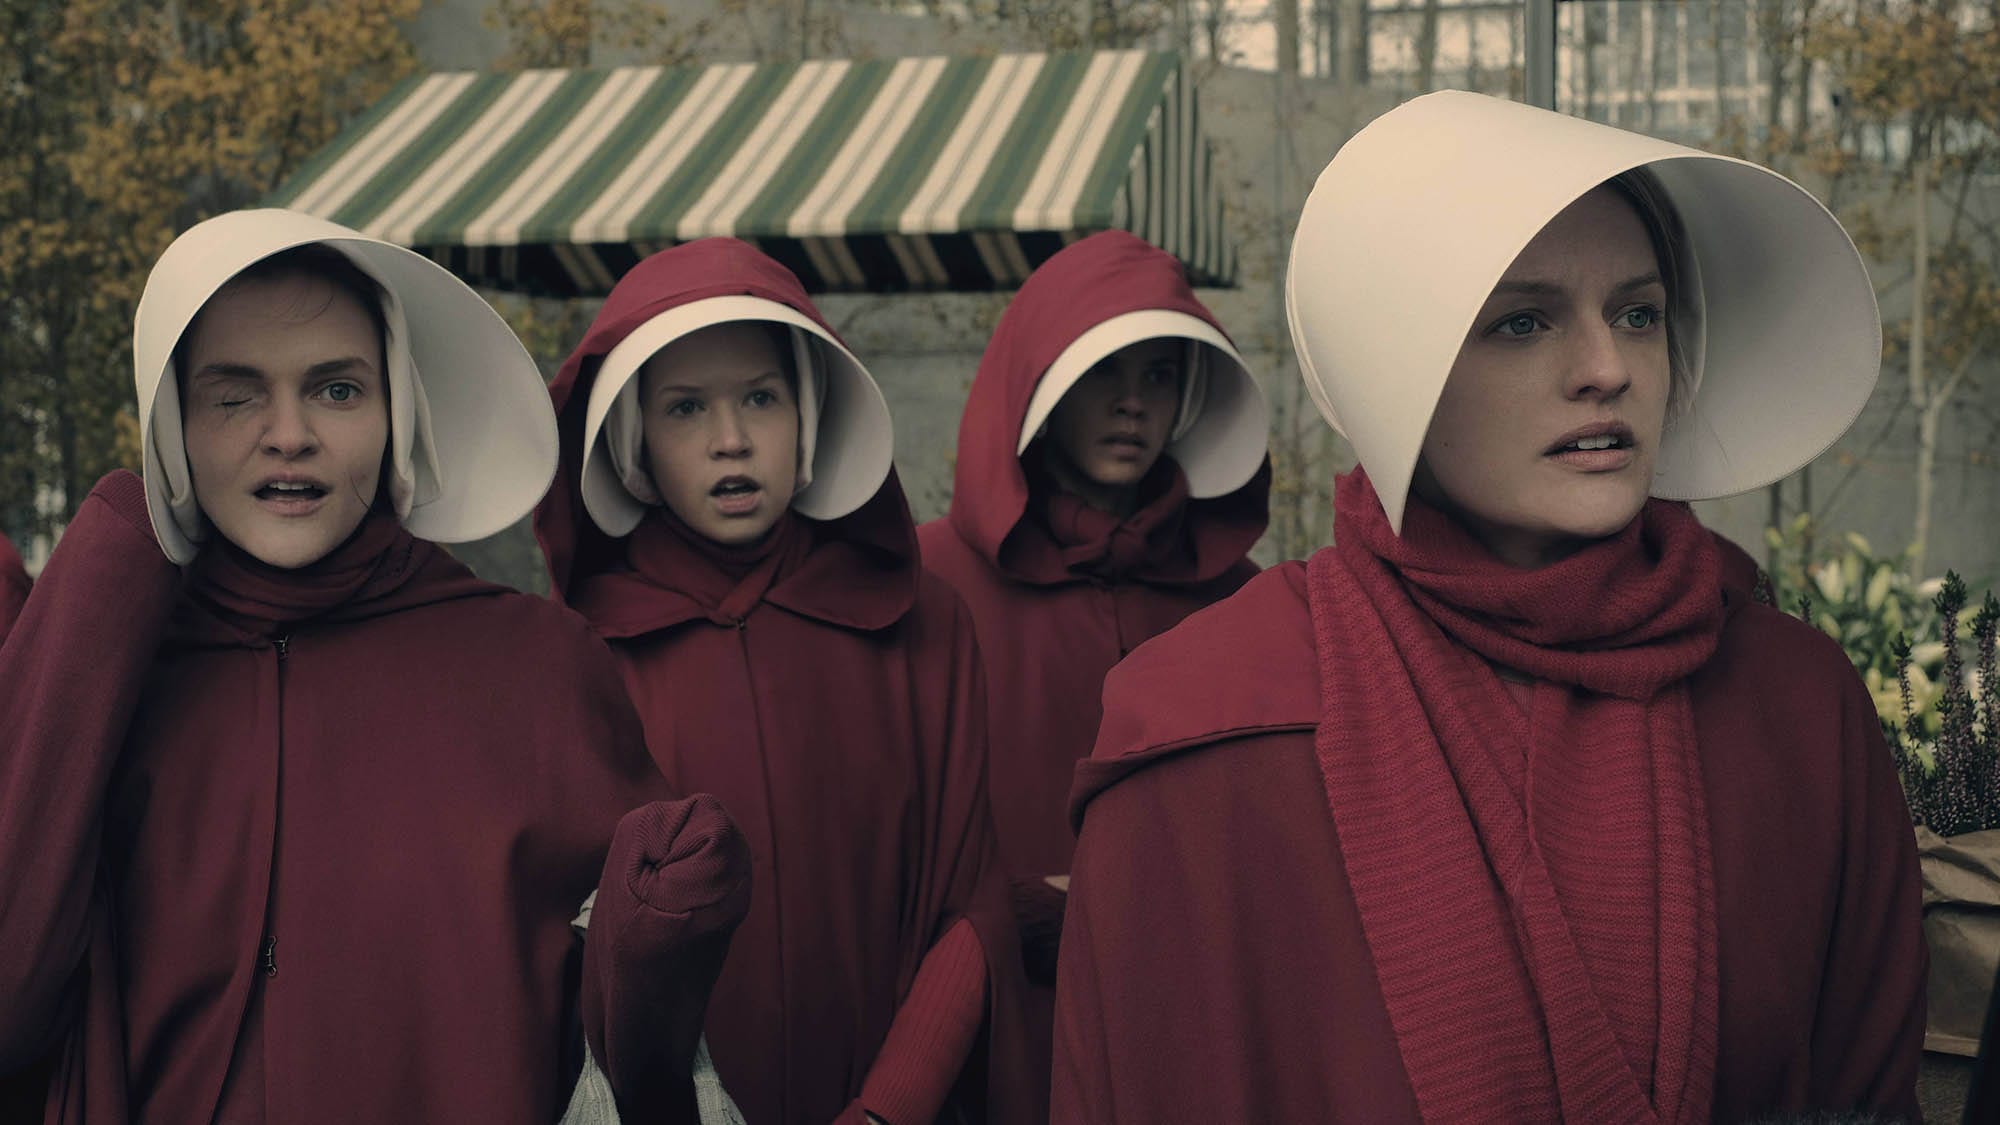 Discover the IRL history behind Hulu's 'The Handmaid's Tale'